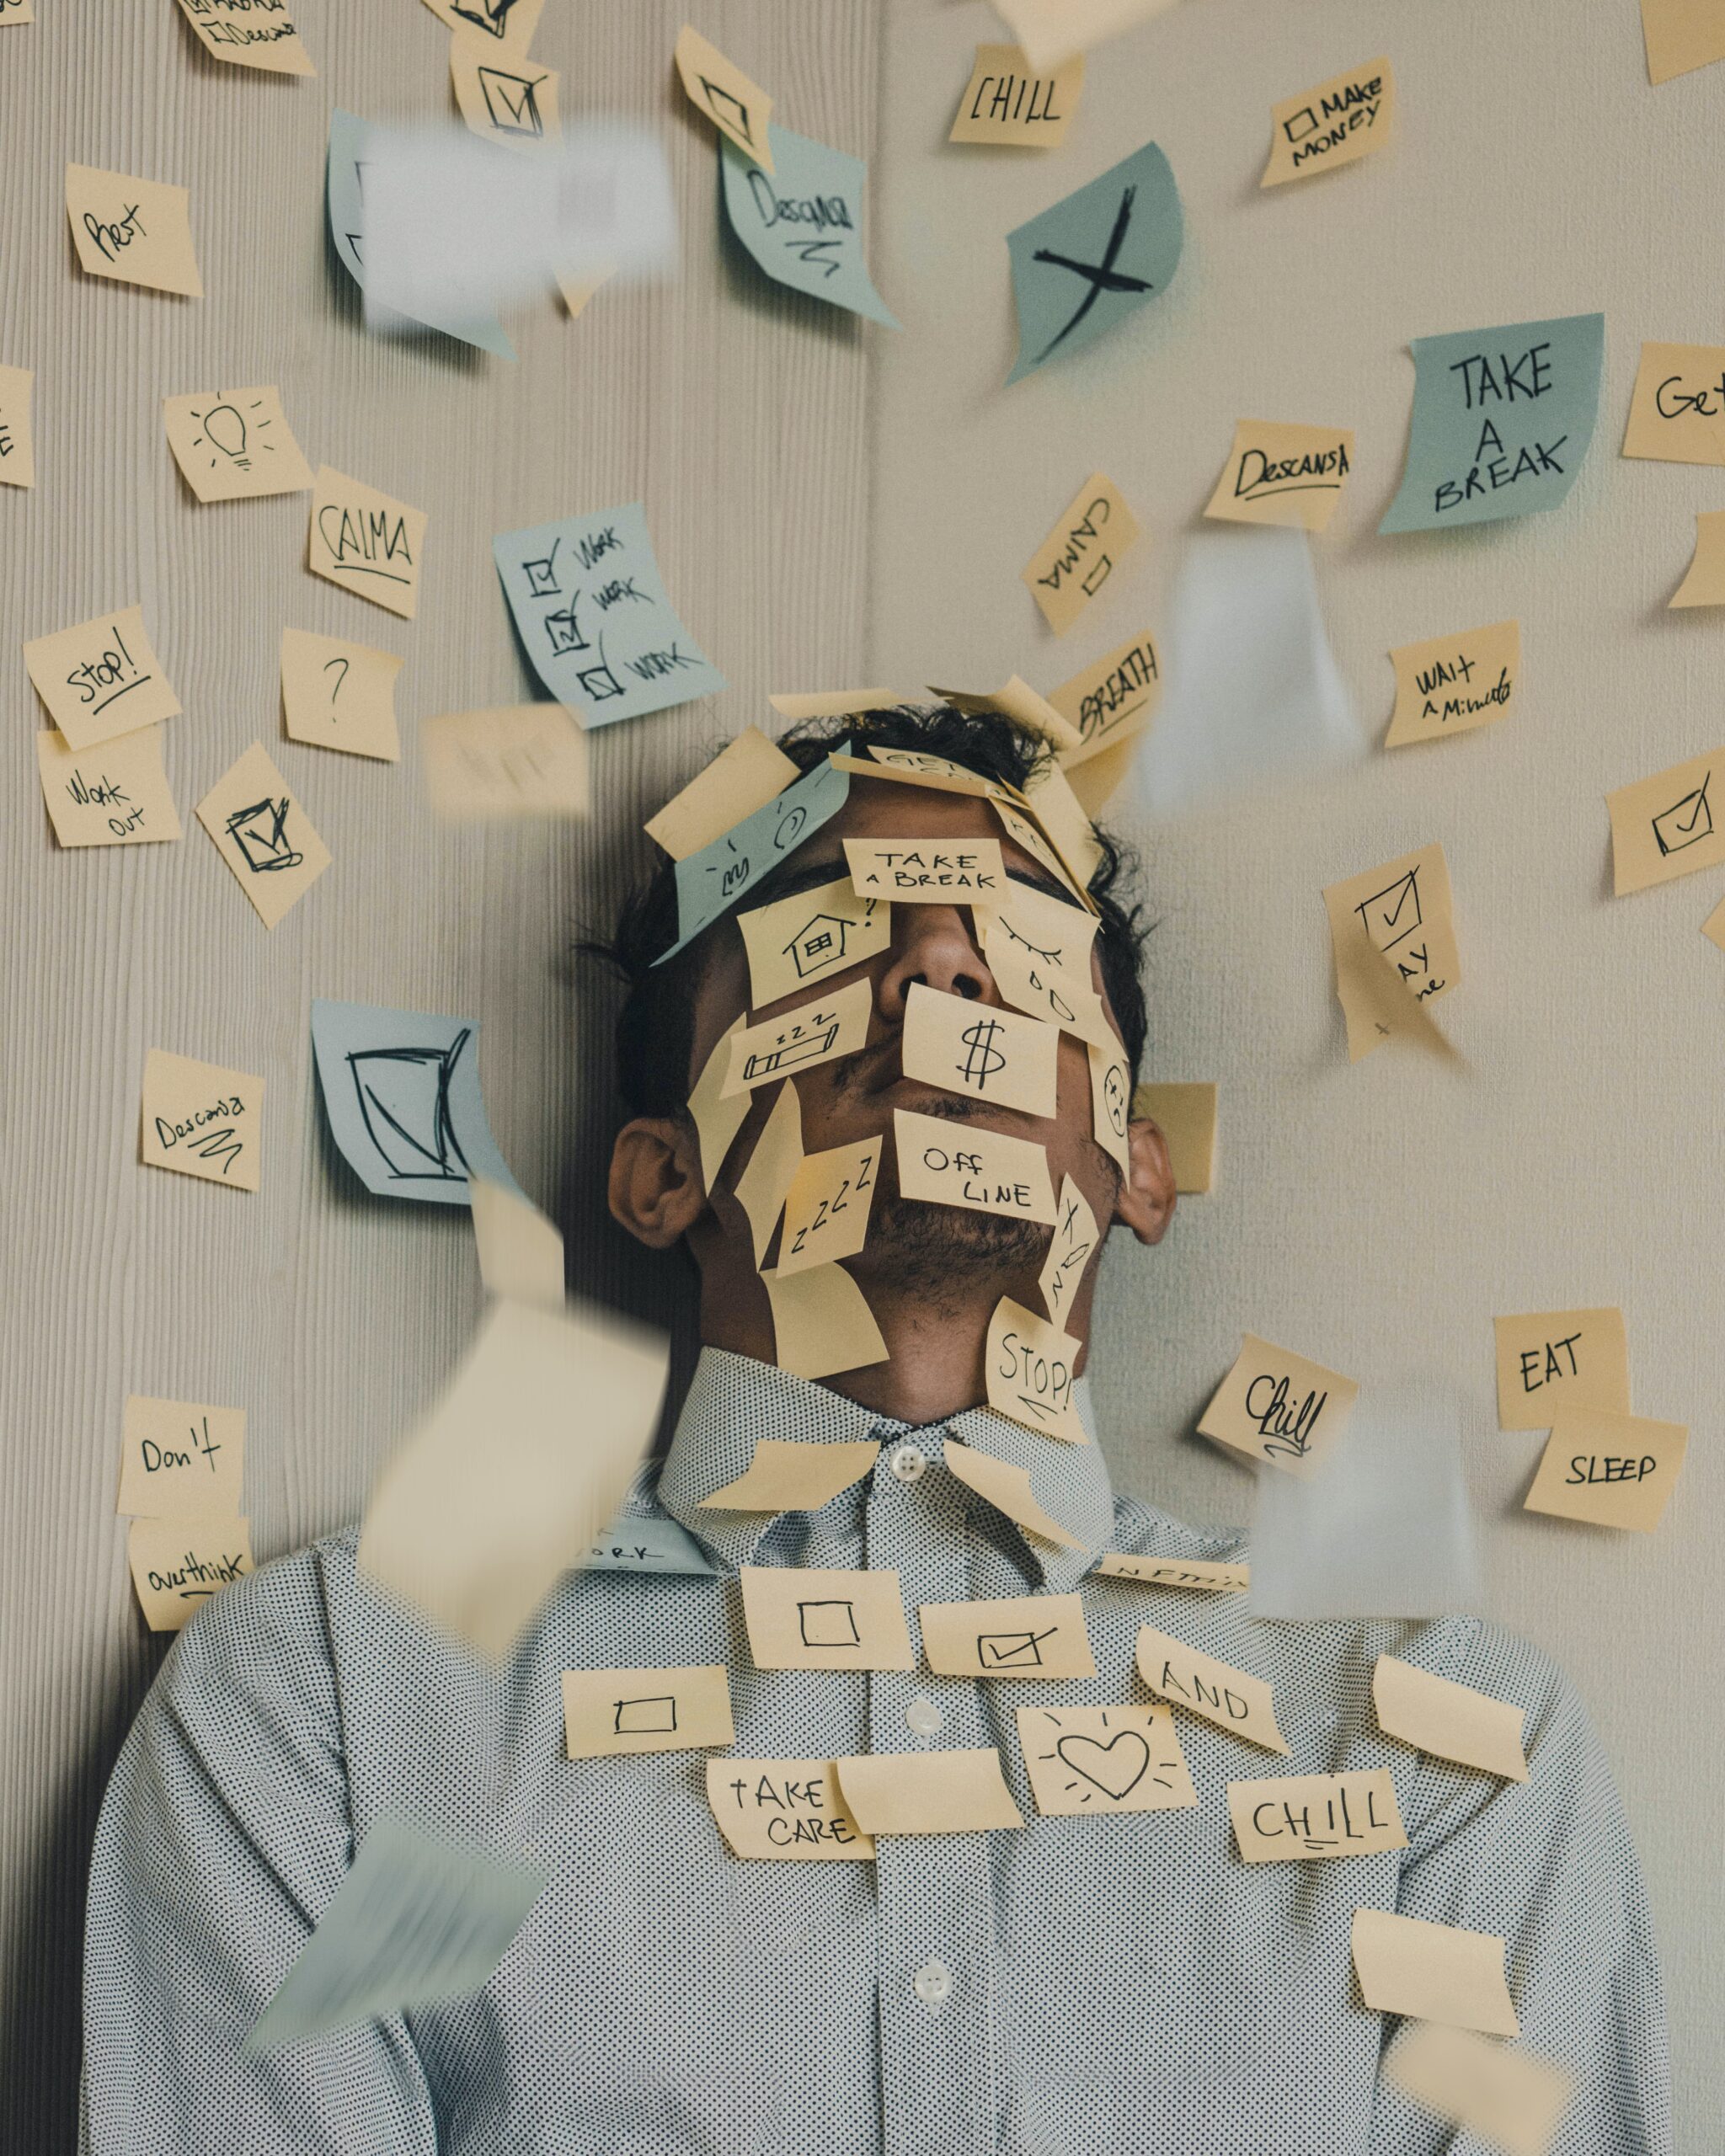 A young man lies on the ground, his face covered in sticky notes